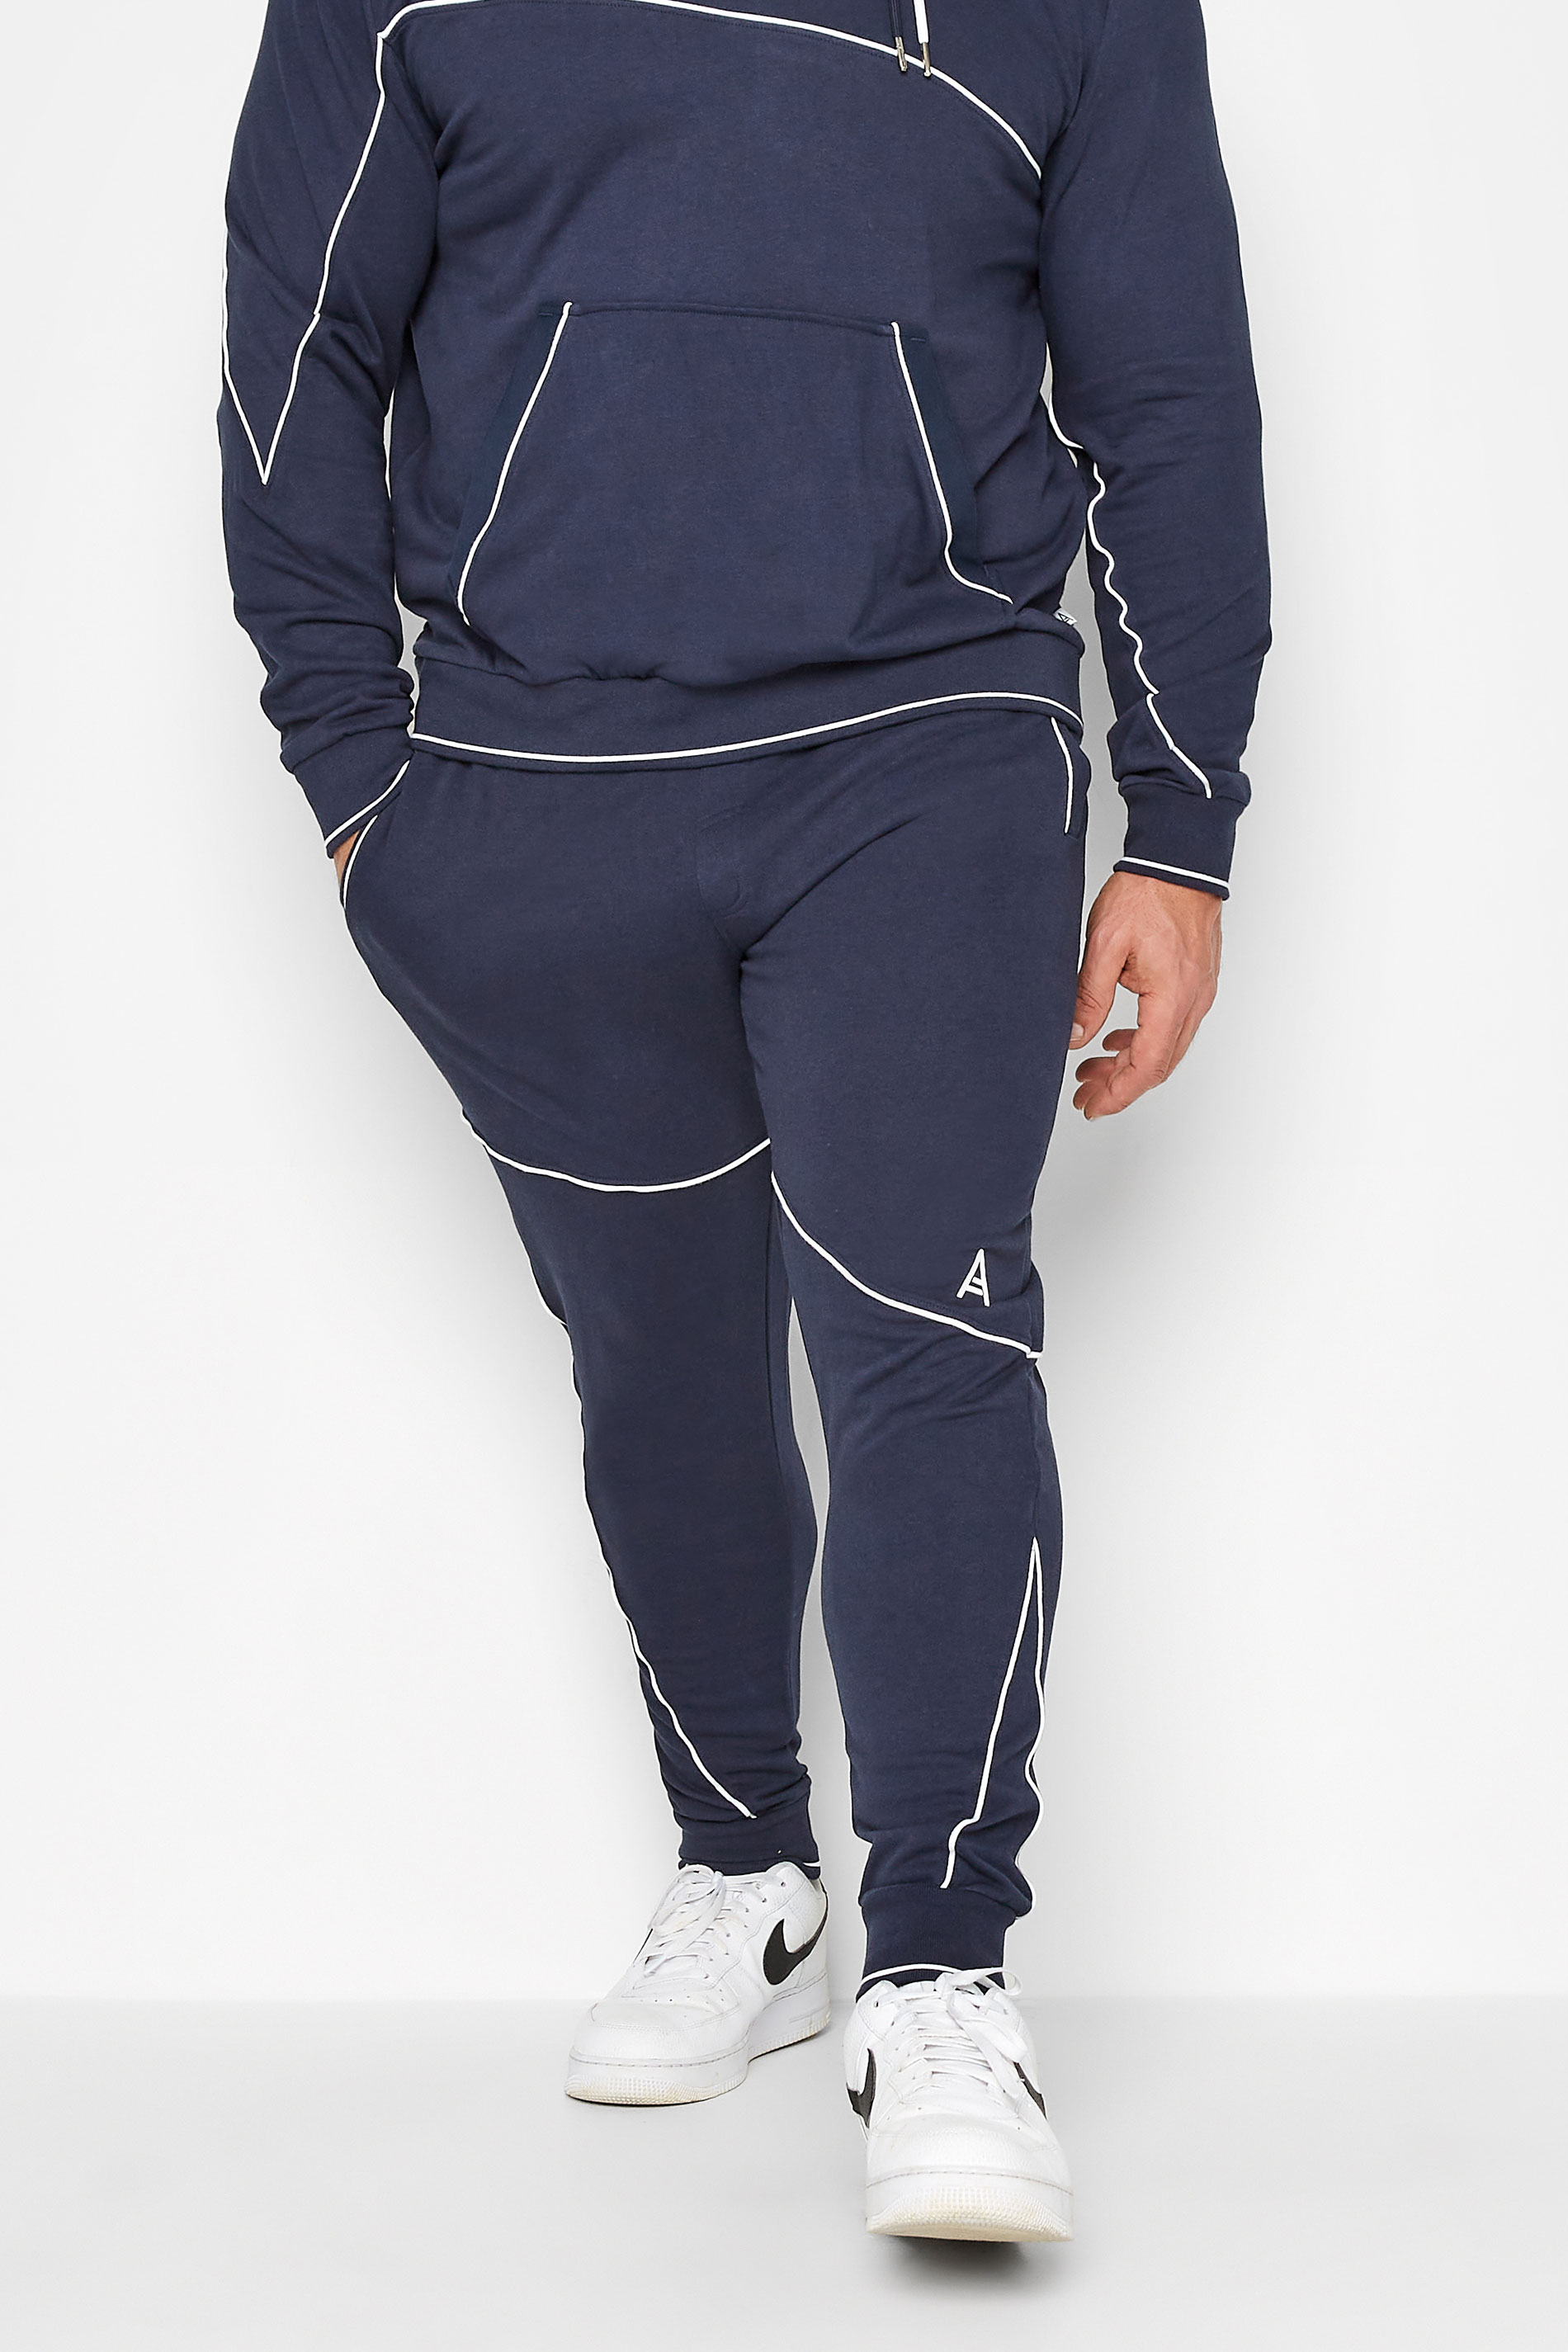 STUDIO A Big & Tall Navy Blue Contrast Piped Joggers | BadRhino 1